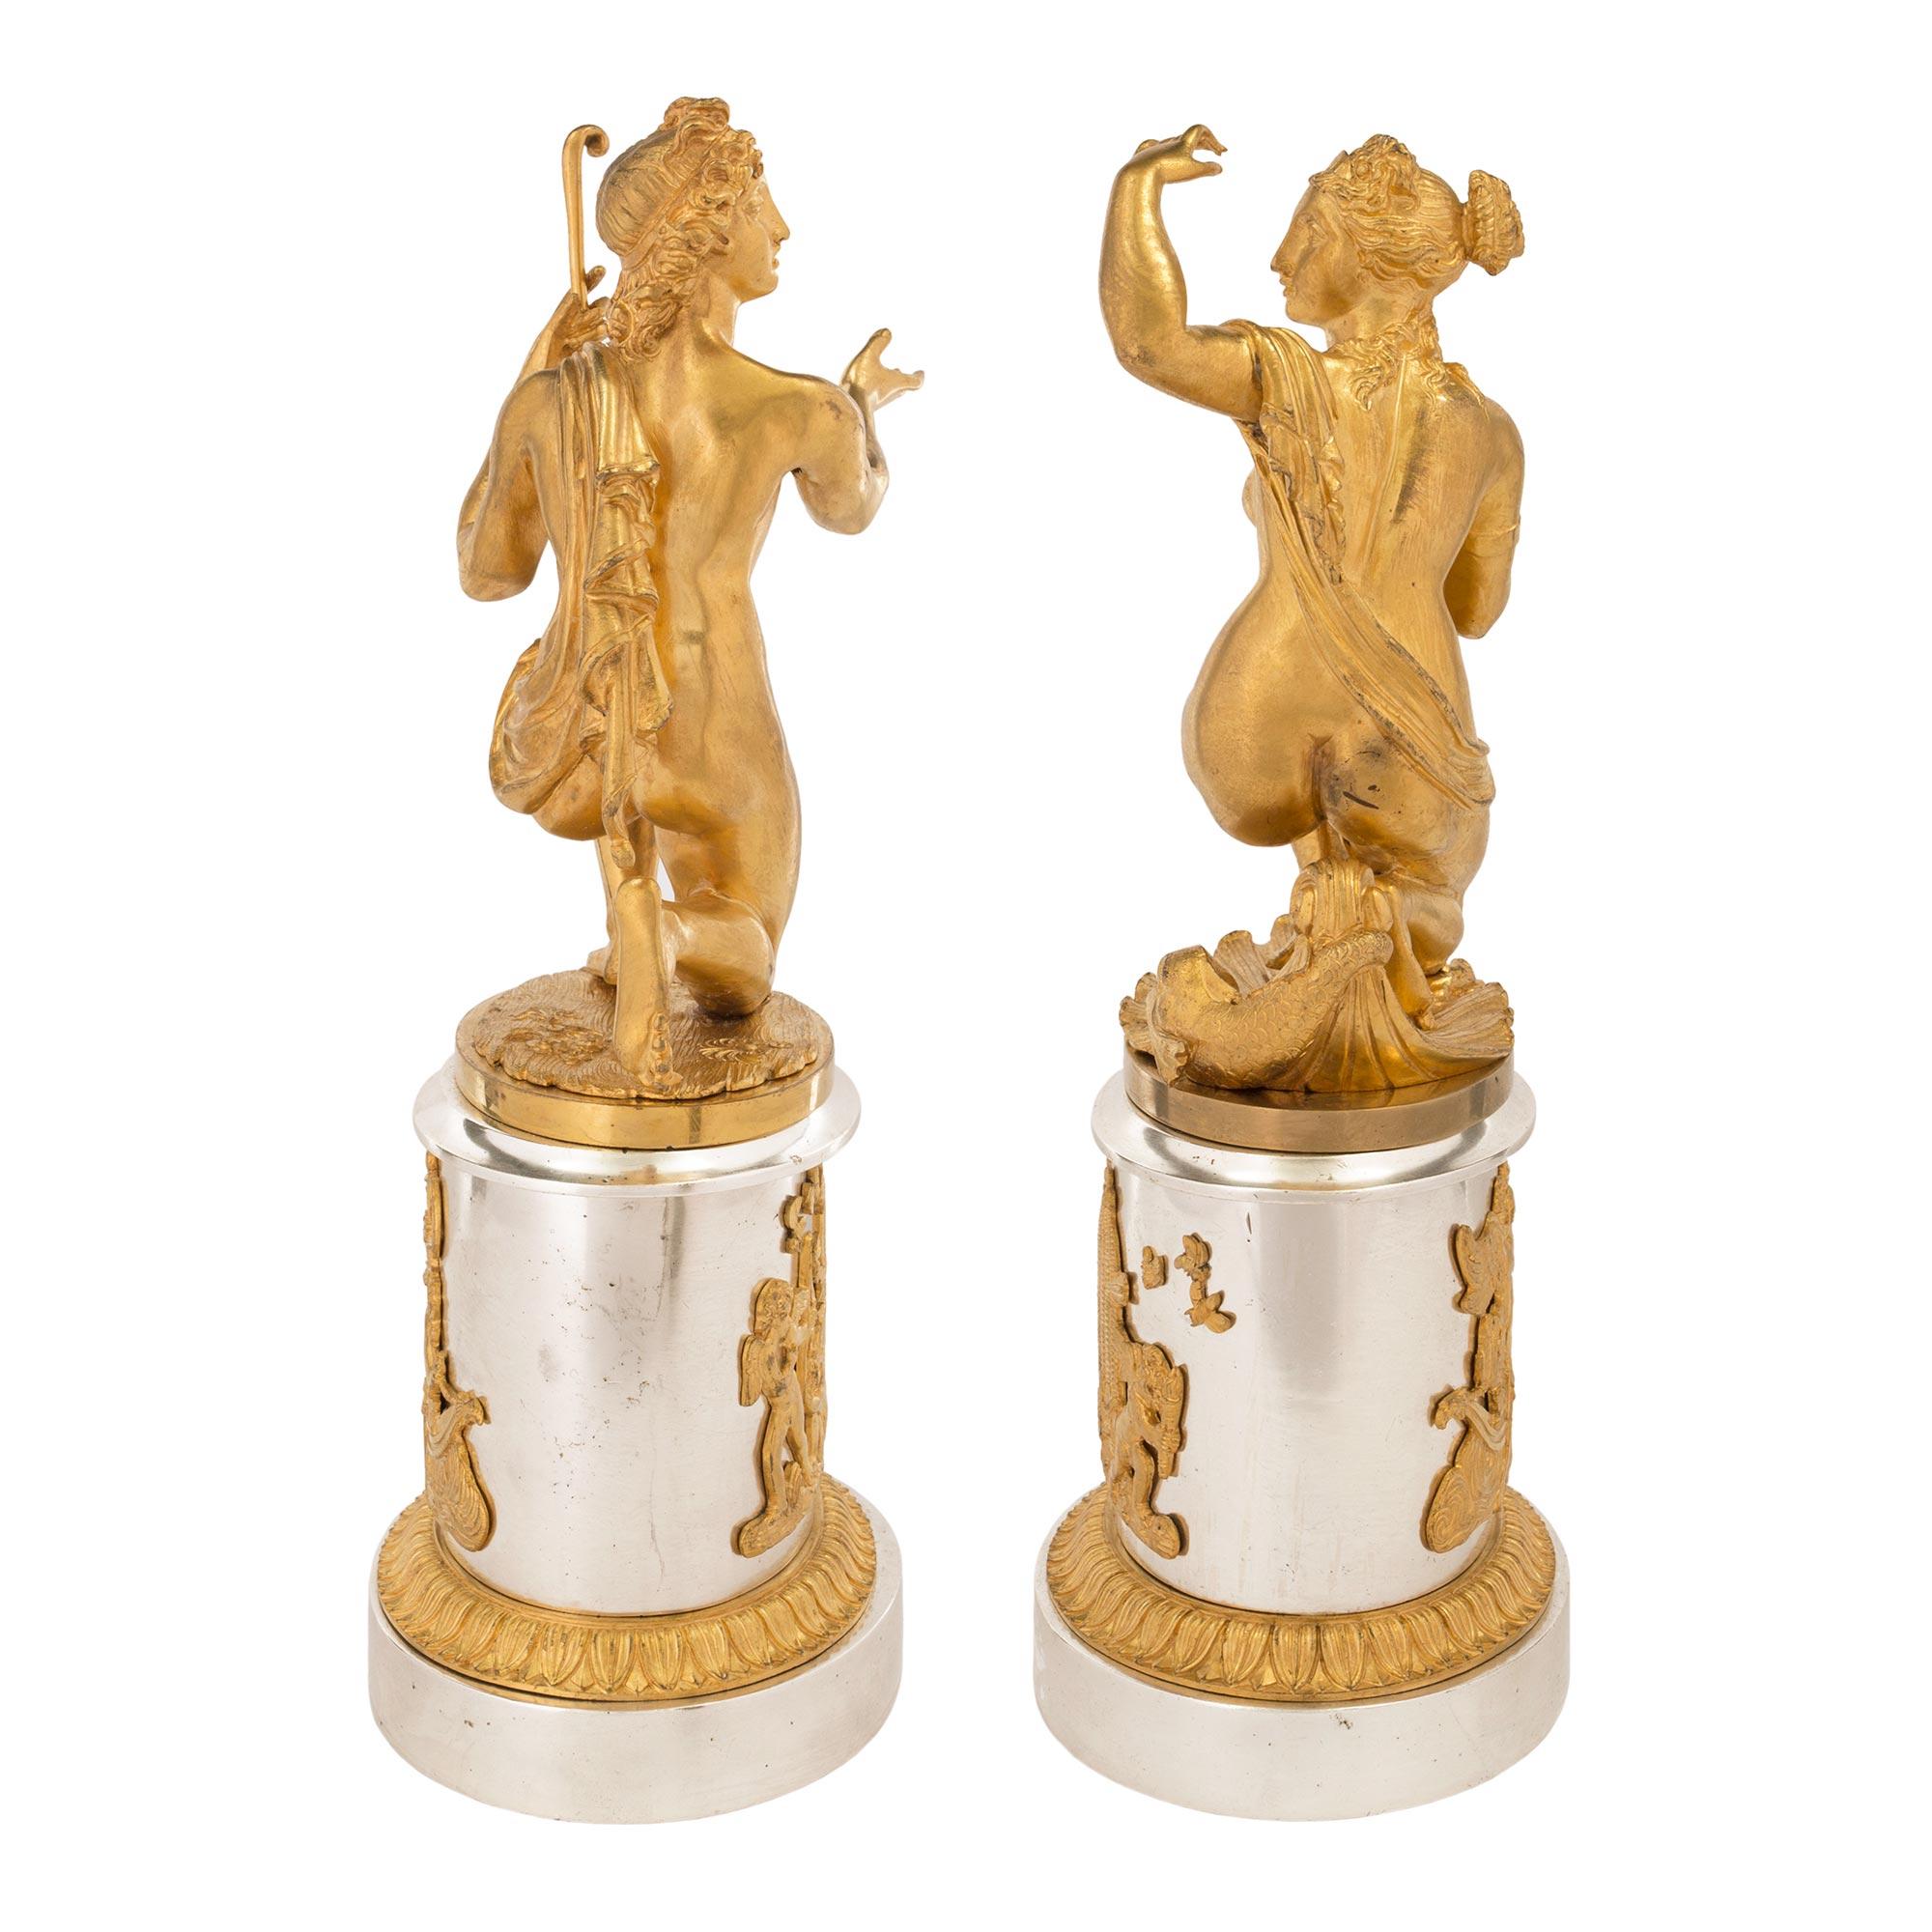 An elegant and high quality true pair of French 19th century Louis XVI st. ormolu and silvered bronze statues. Each statue is raised by silvered bronze oval bases with Fine mottled foliate ormolu bands and strikingly decorative and extremely